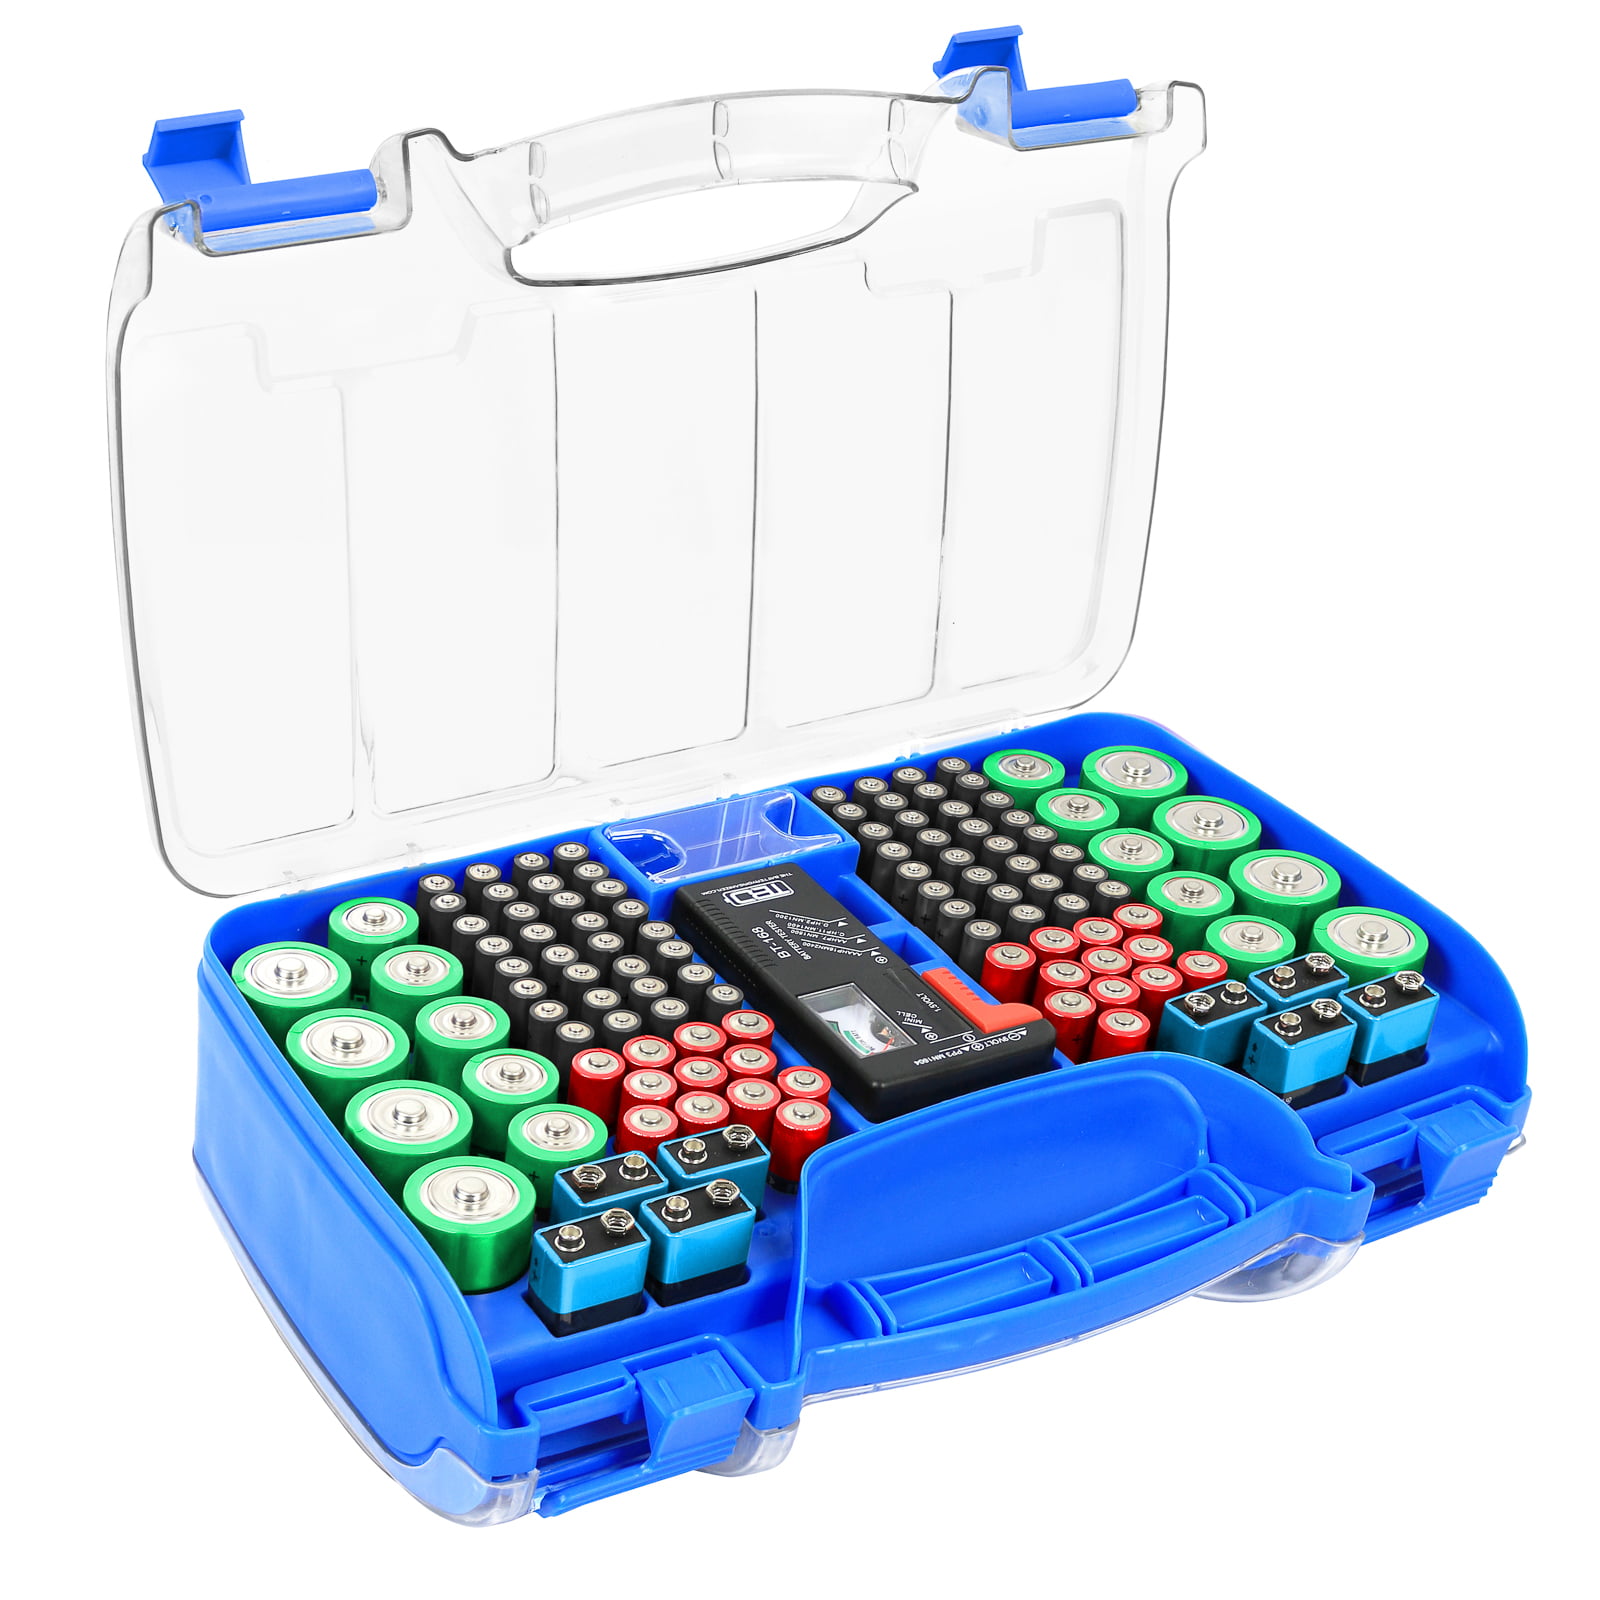 Shoppers Love The Battery Organizer Storage Case